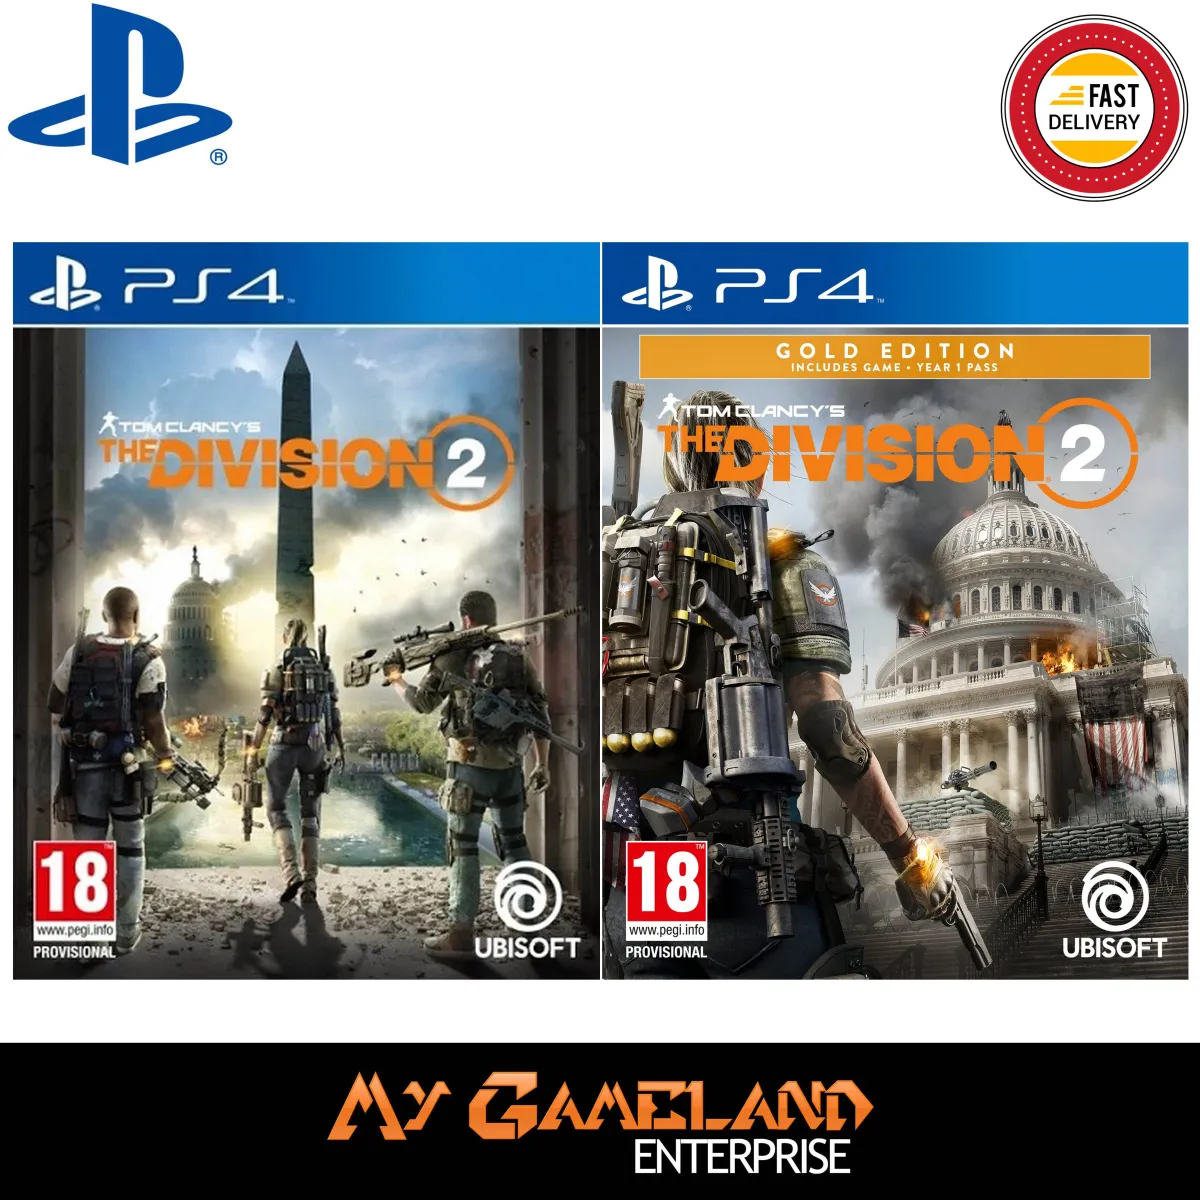 PS4 Tom Clancys The Division 2 Standard / Gold (R2/R3)(English/Chinese) PS4 Games | Lazada